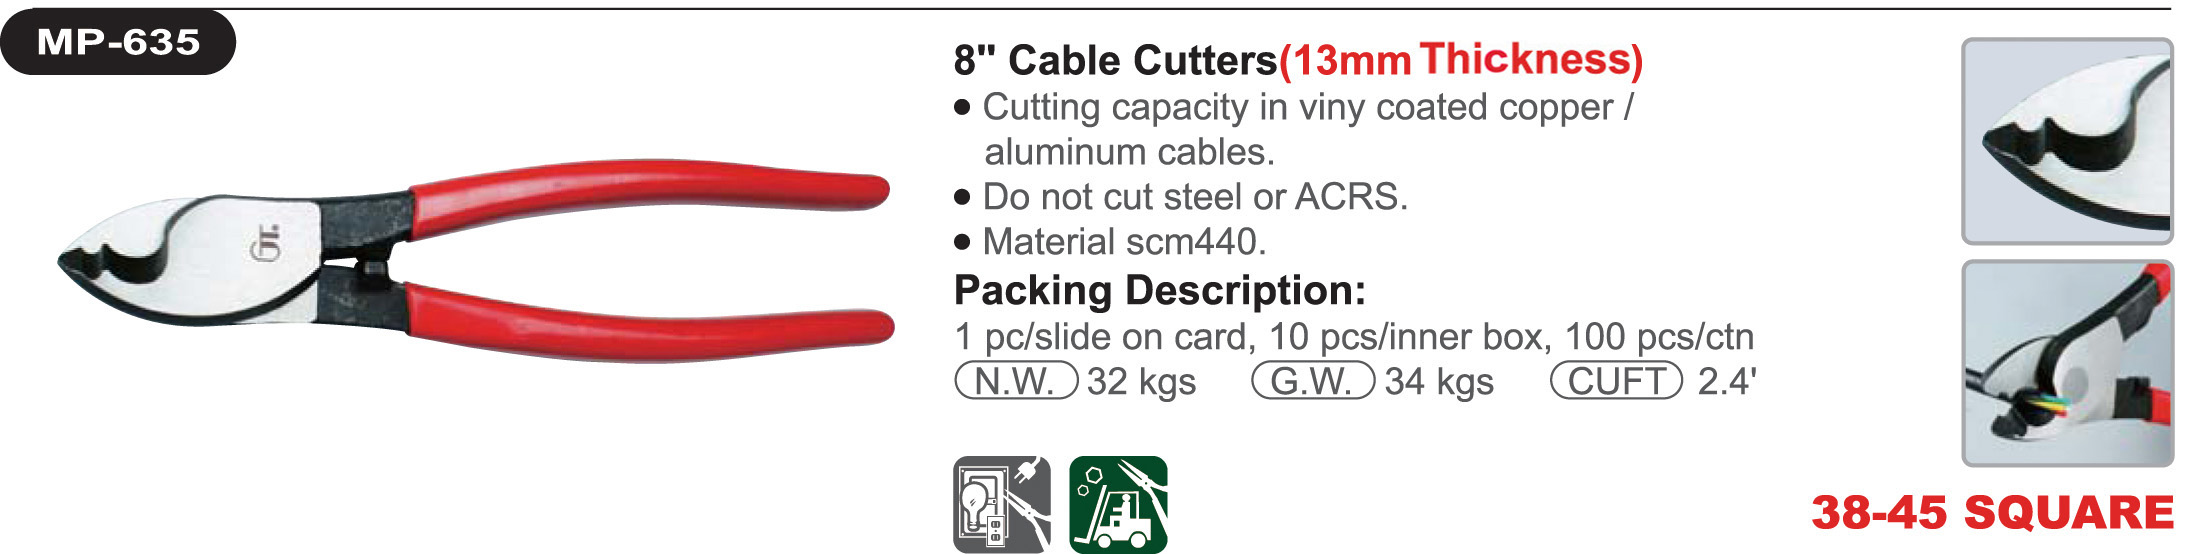 proimages/product/pliers/cable_and_wire_rope_cutter/Precision_Cable_Cutter/MP-635/MP-635.jpg